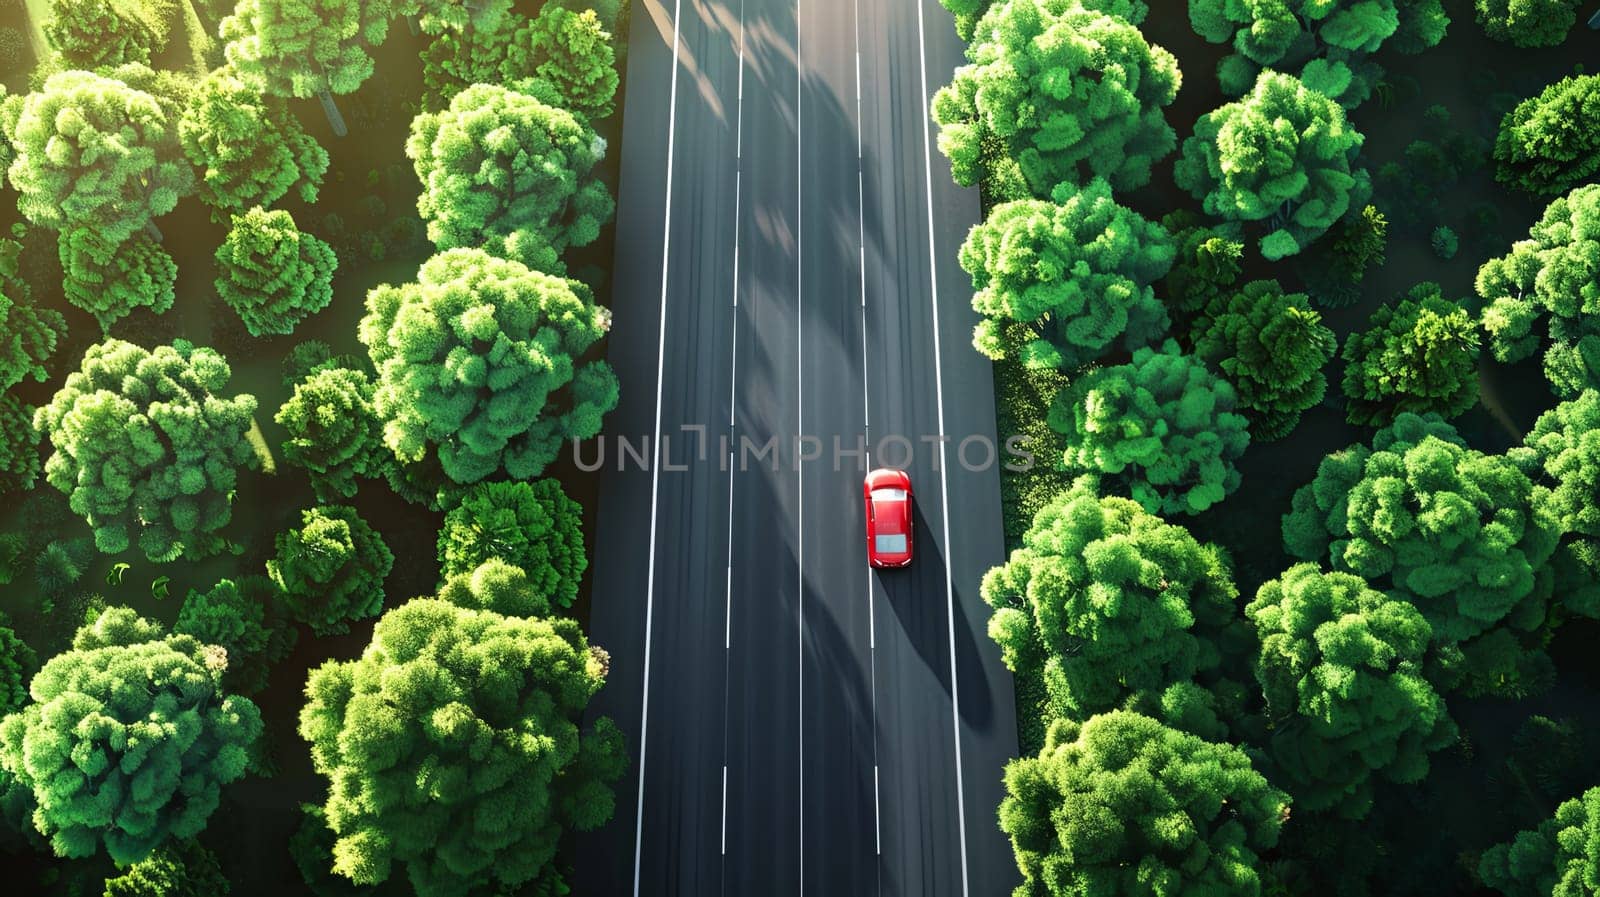 A red car drives on a road surrounded by green trees in a forested area.